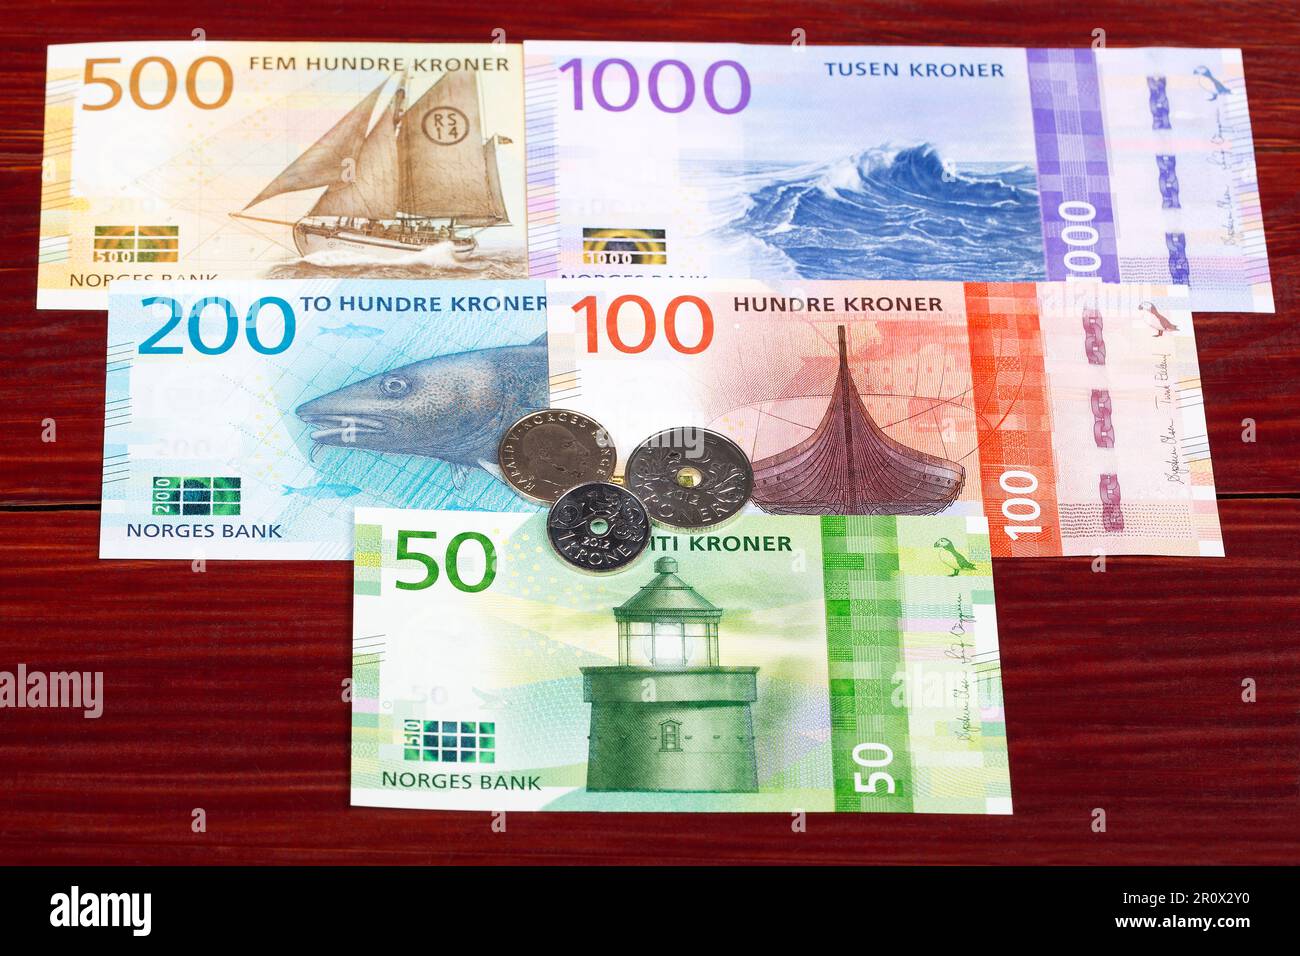 Norwegian money - Kroner - coins and banknotes Stock Photo - Alamy